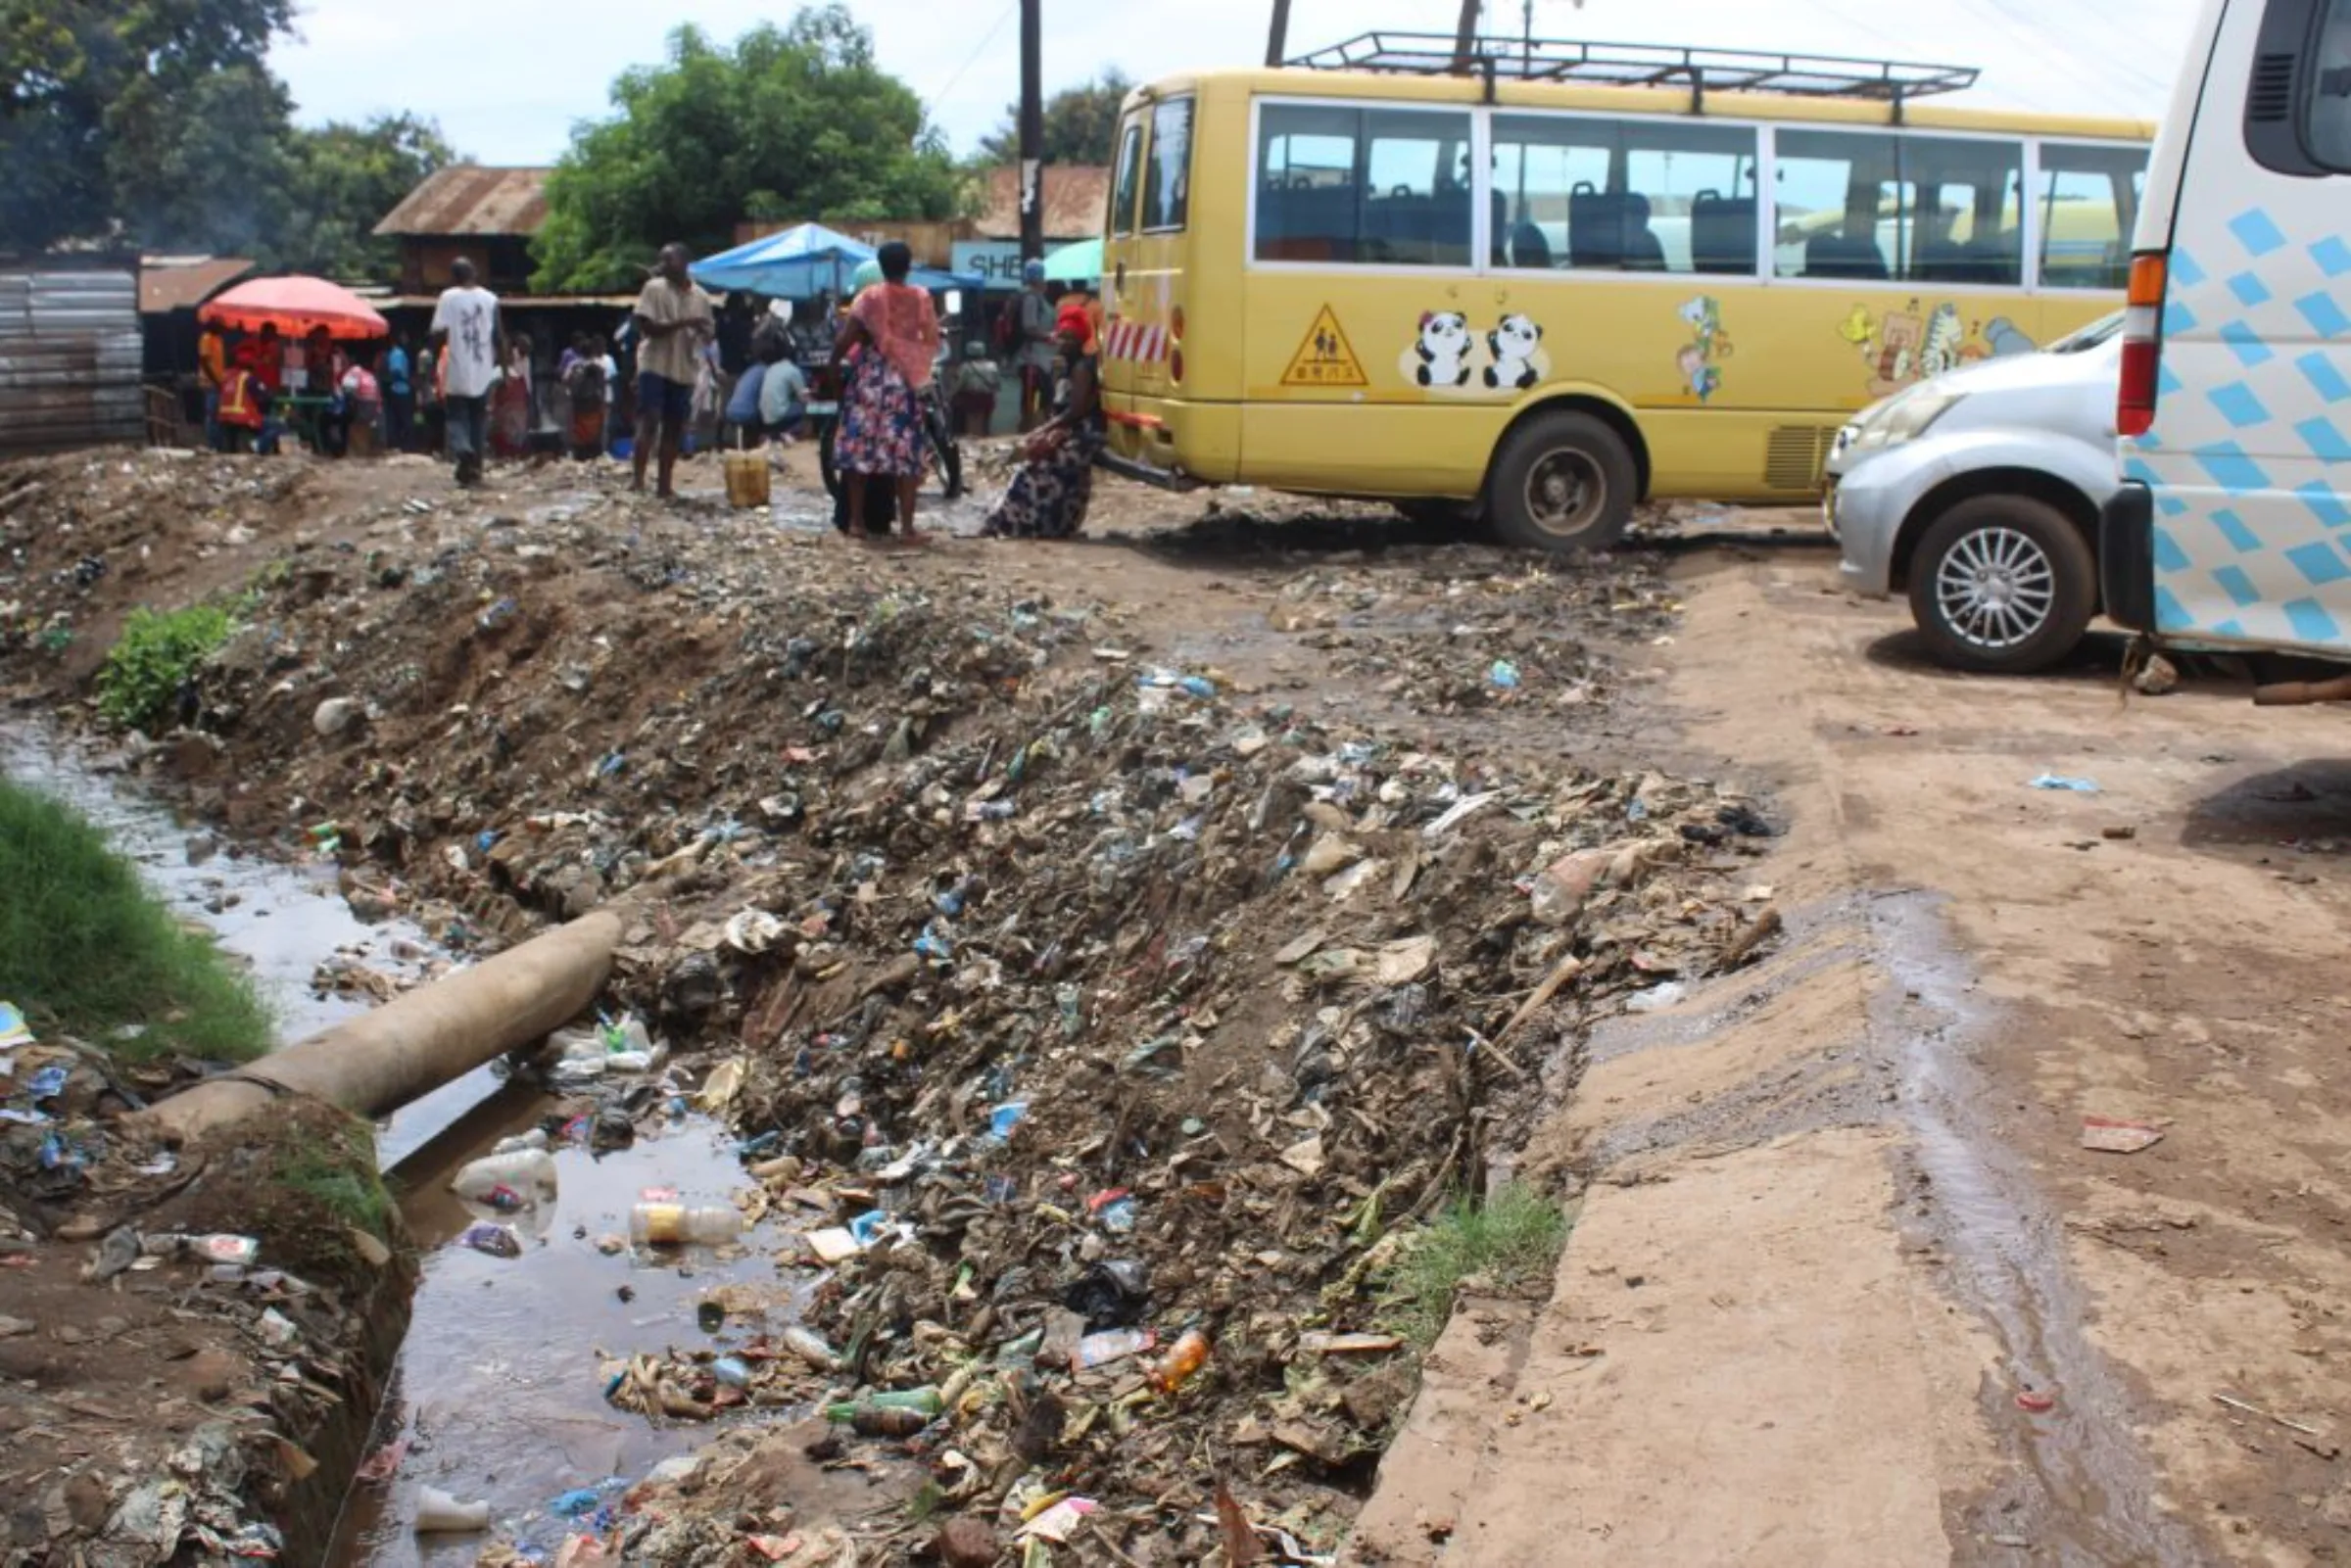 Stagnant water and polluted water in the city of Lilongwe, Malawi. Poor hygiene in townships and locations is one of the contributing factor to the outbreak. January 11, 2023